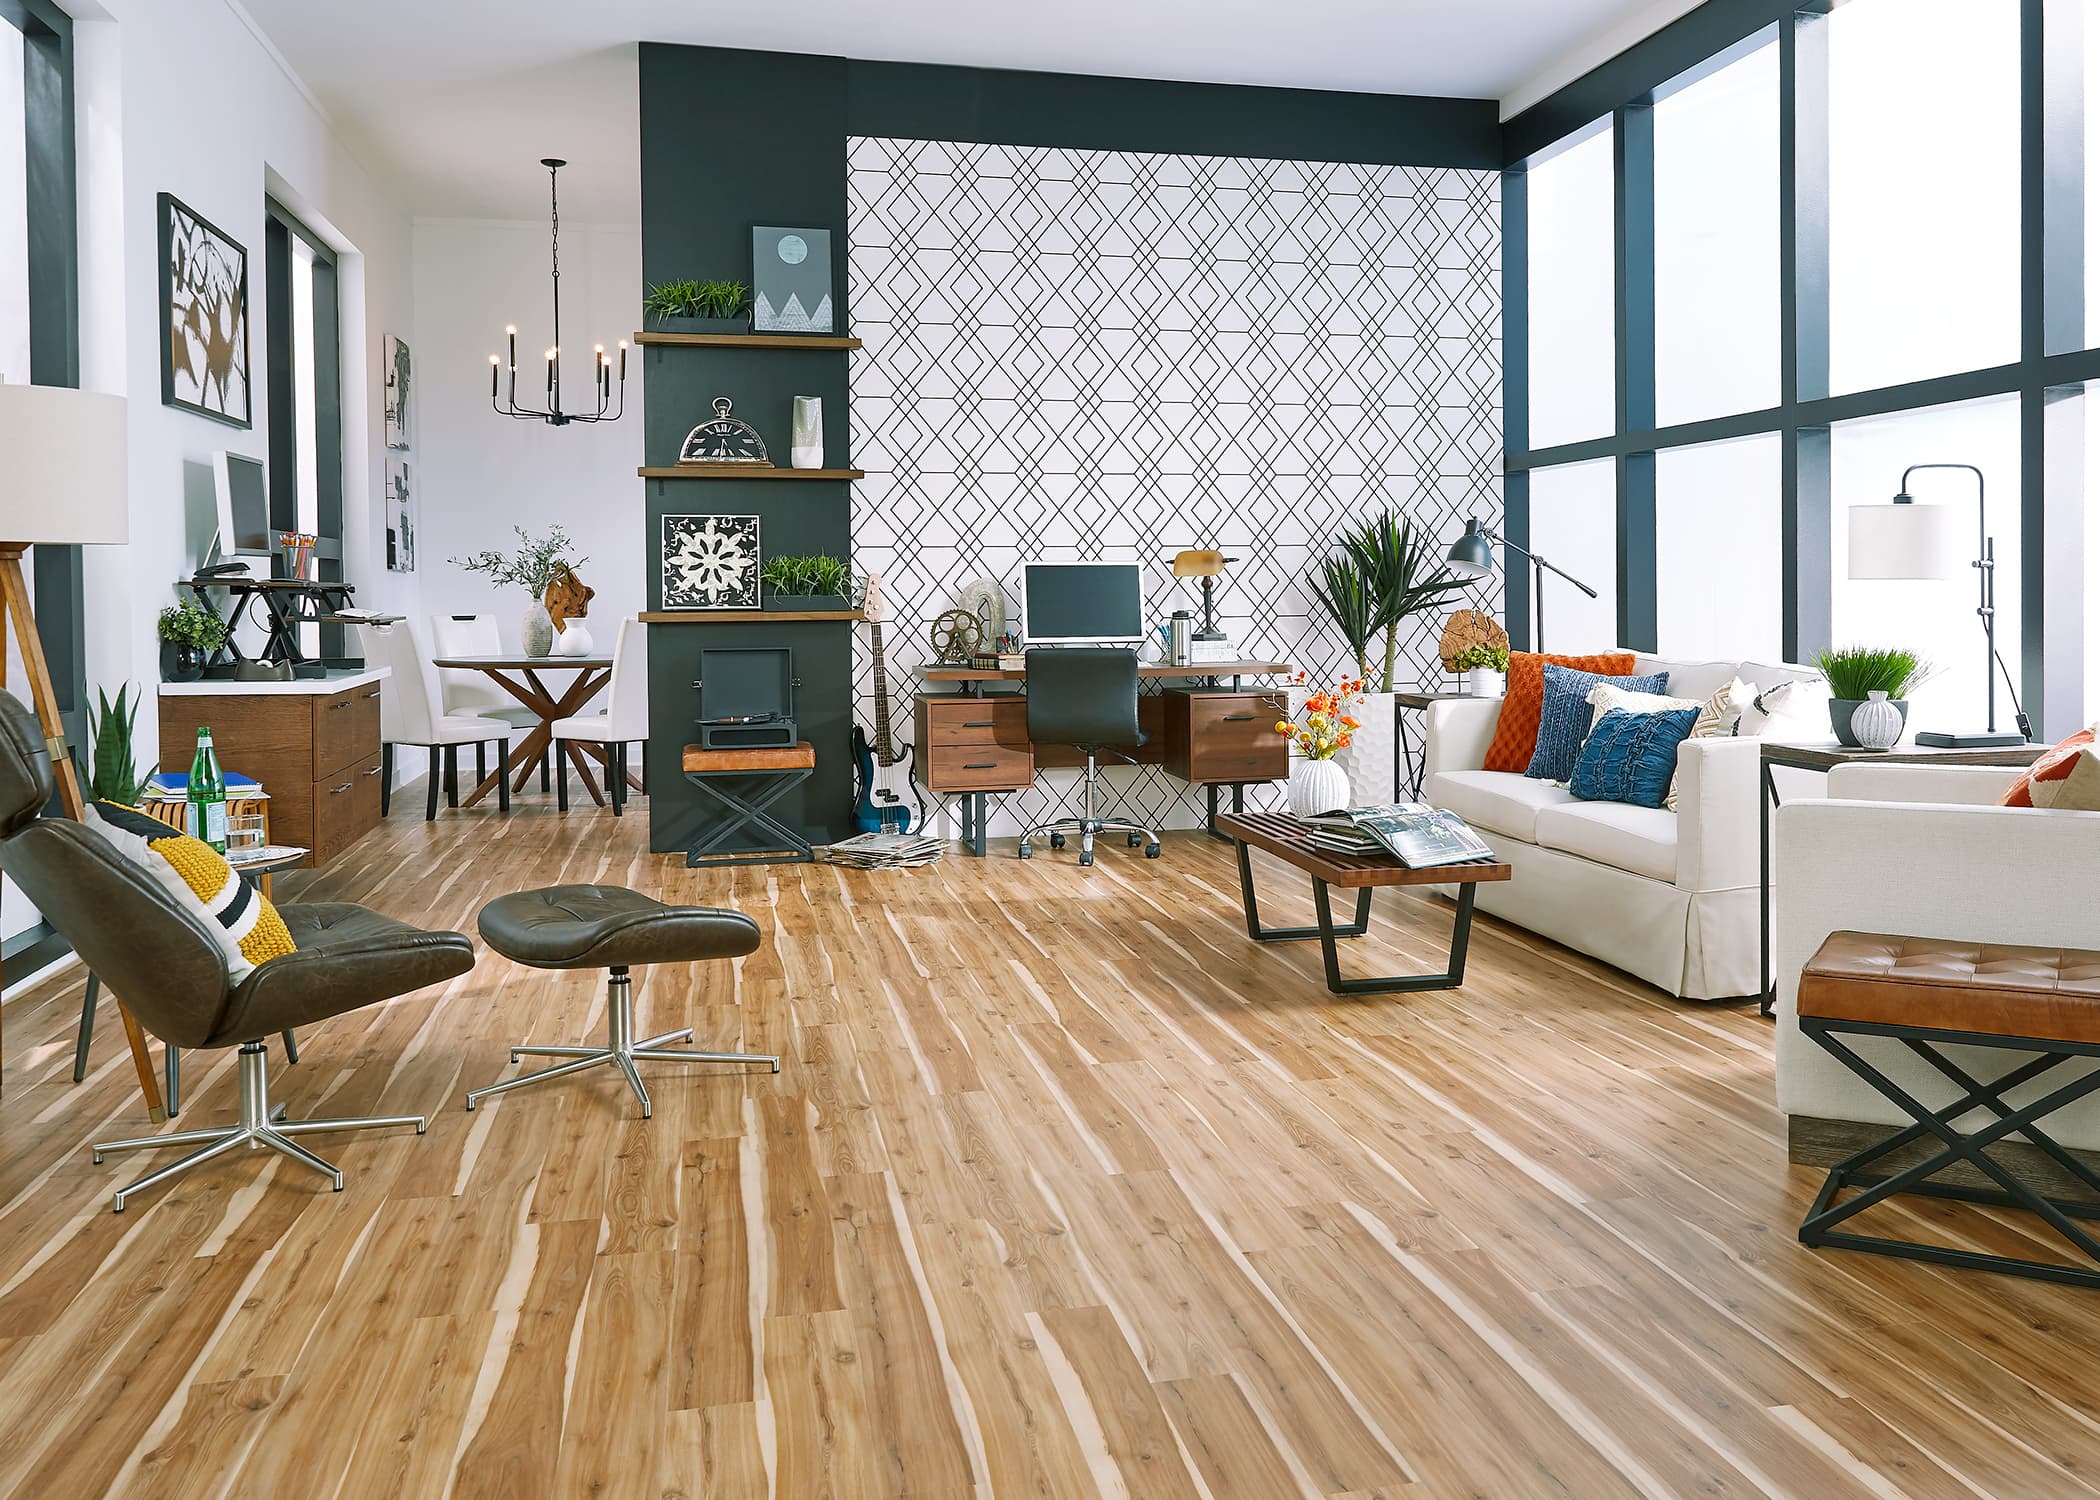 The 'Can I Install Laminate Flooring Over This?' Guide